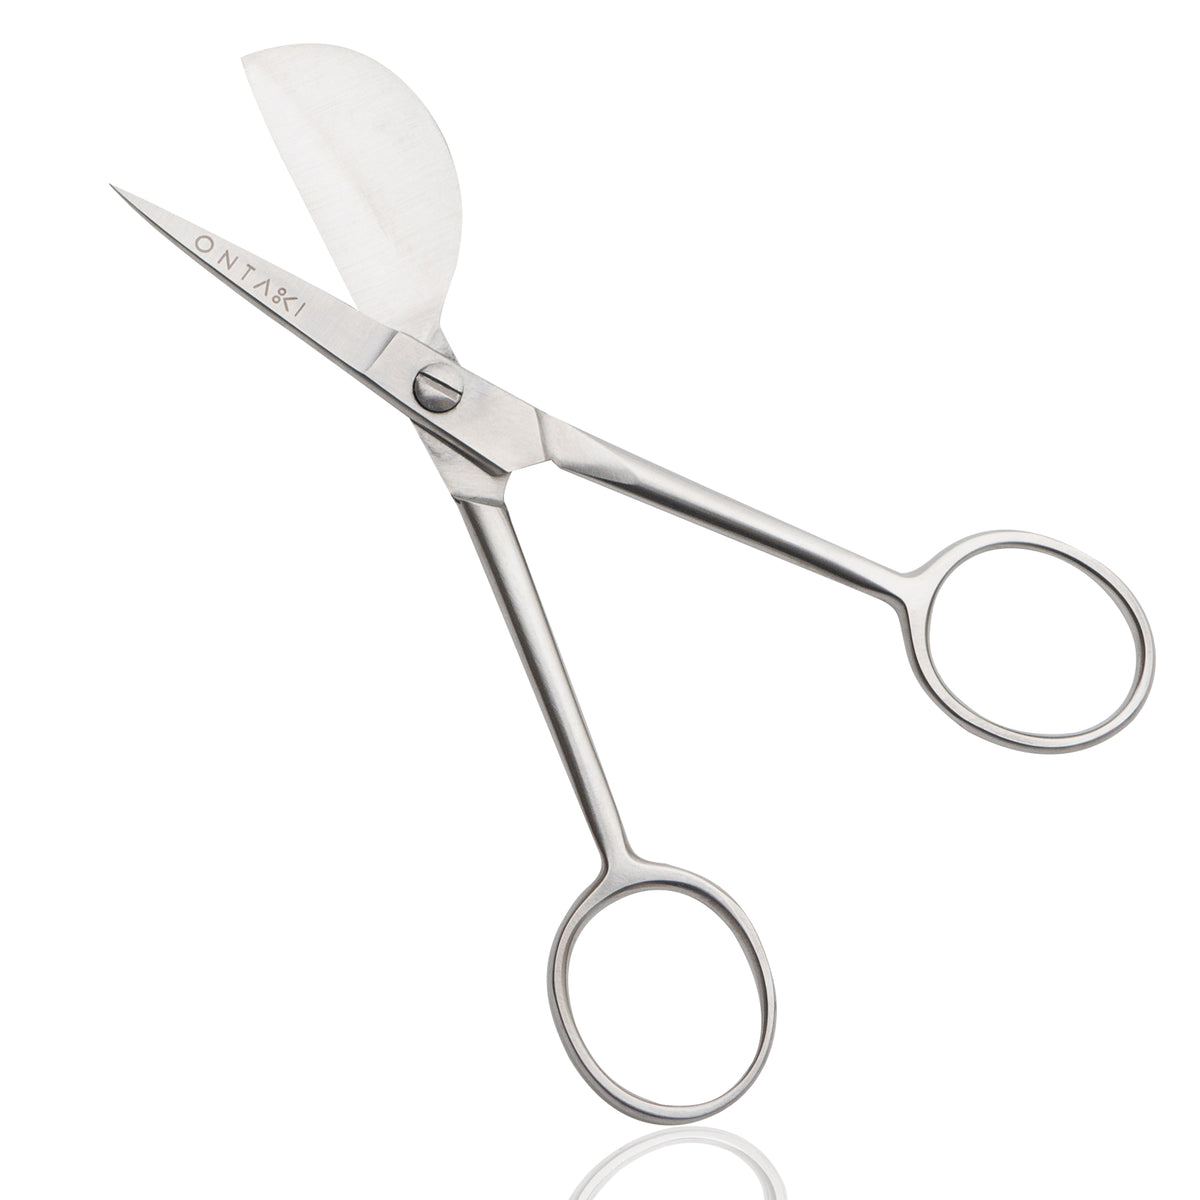 20 PELICAN BILL APPLIQUE SCISSORS STAINLESS STEEL – Embroidery Supply Shop